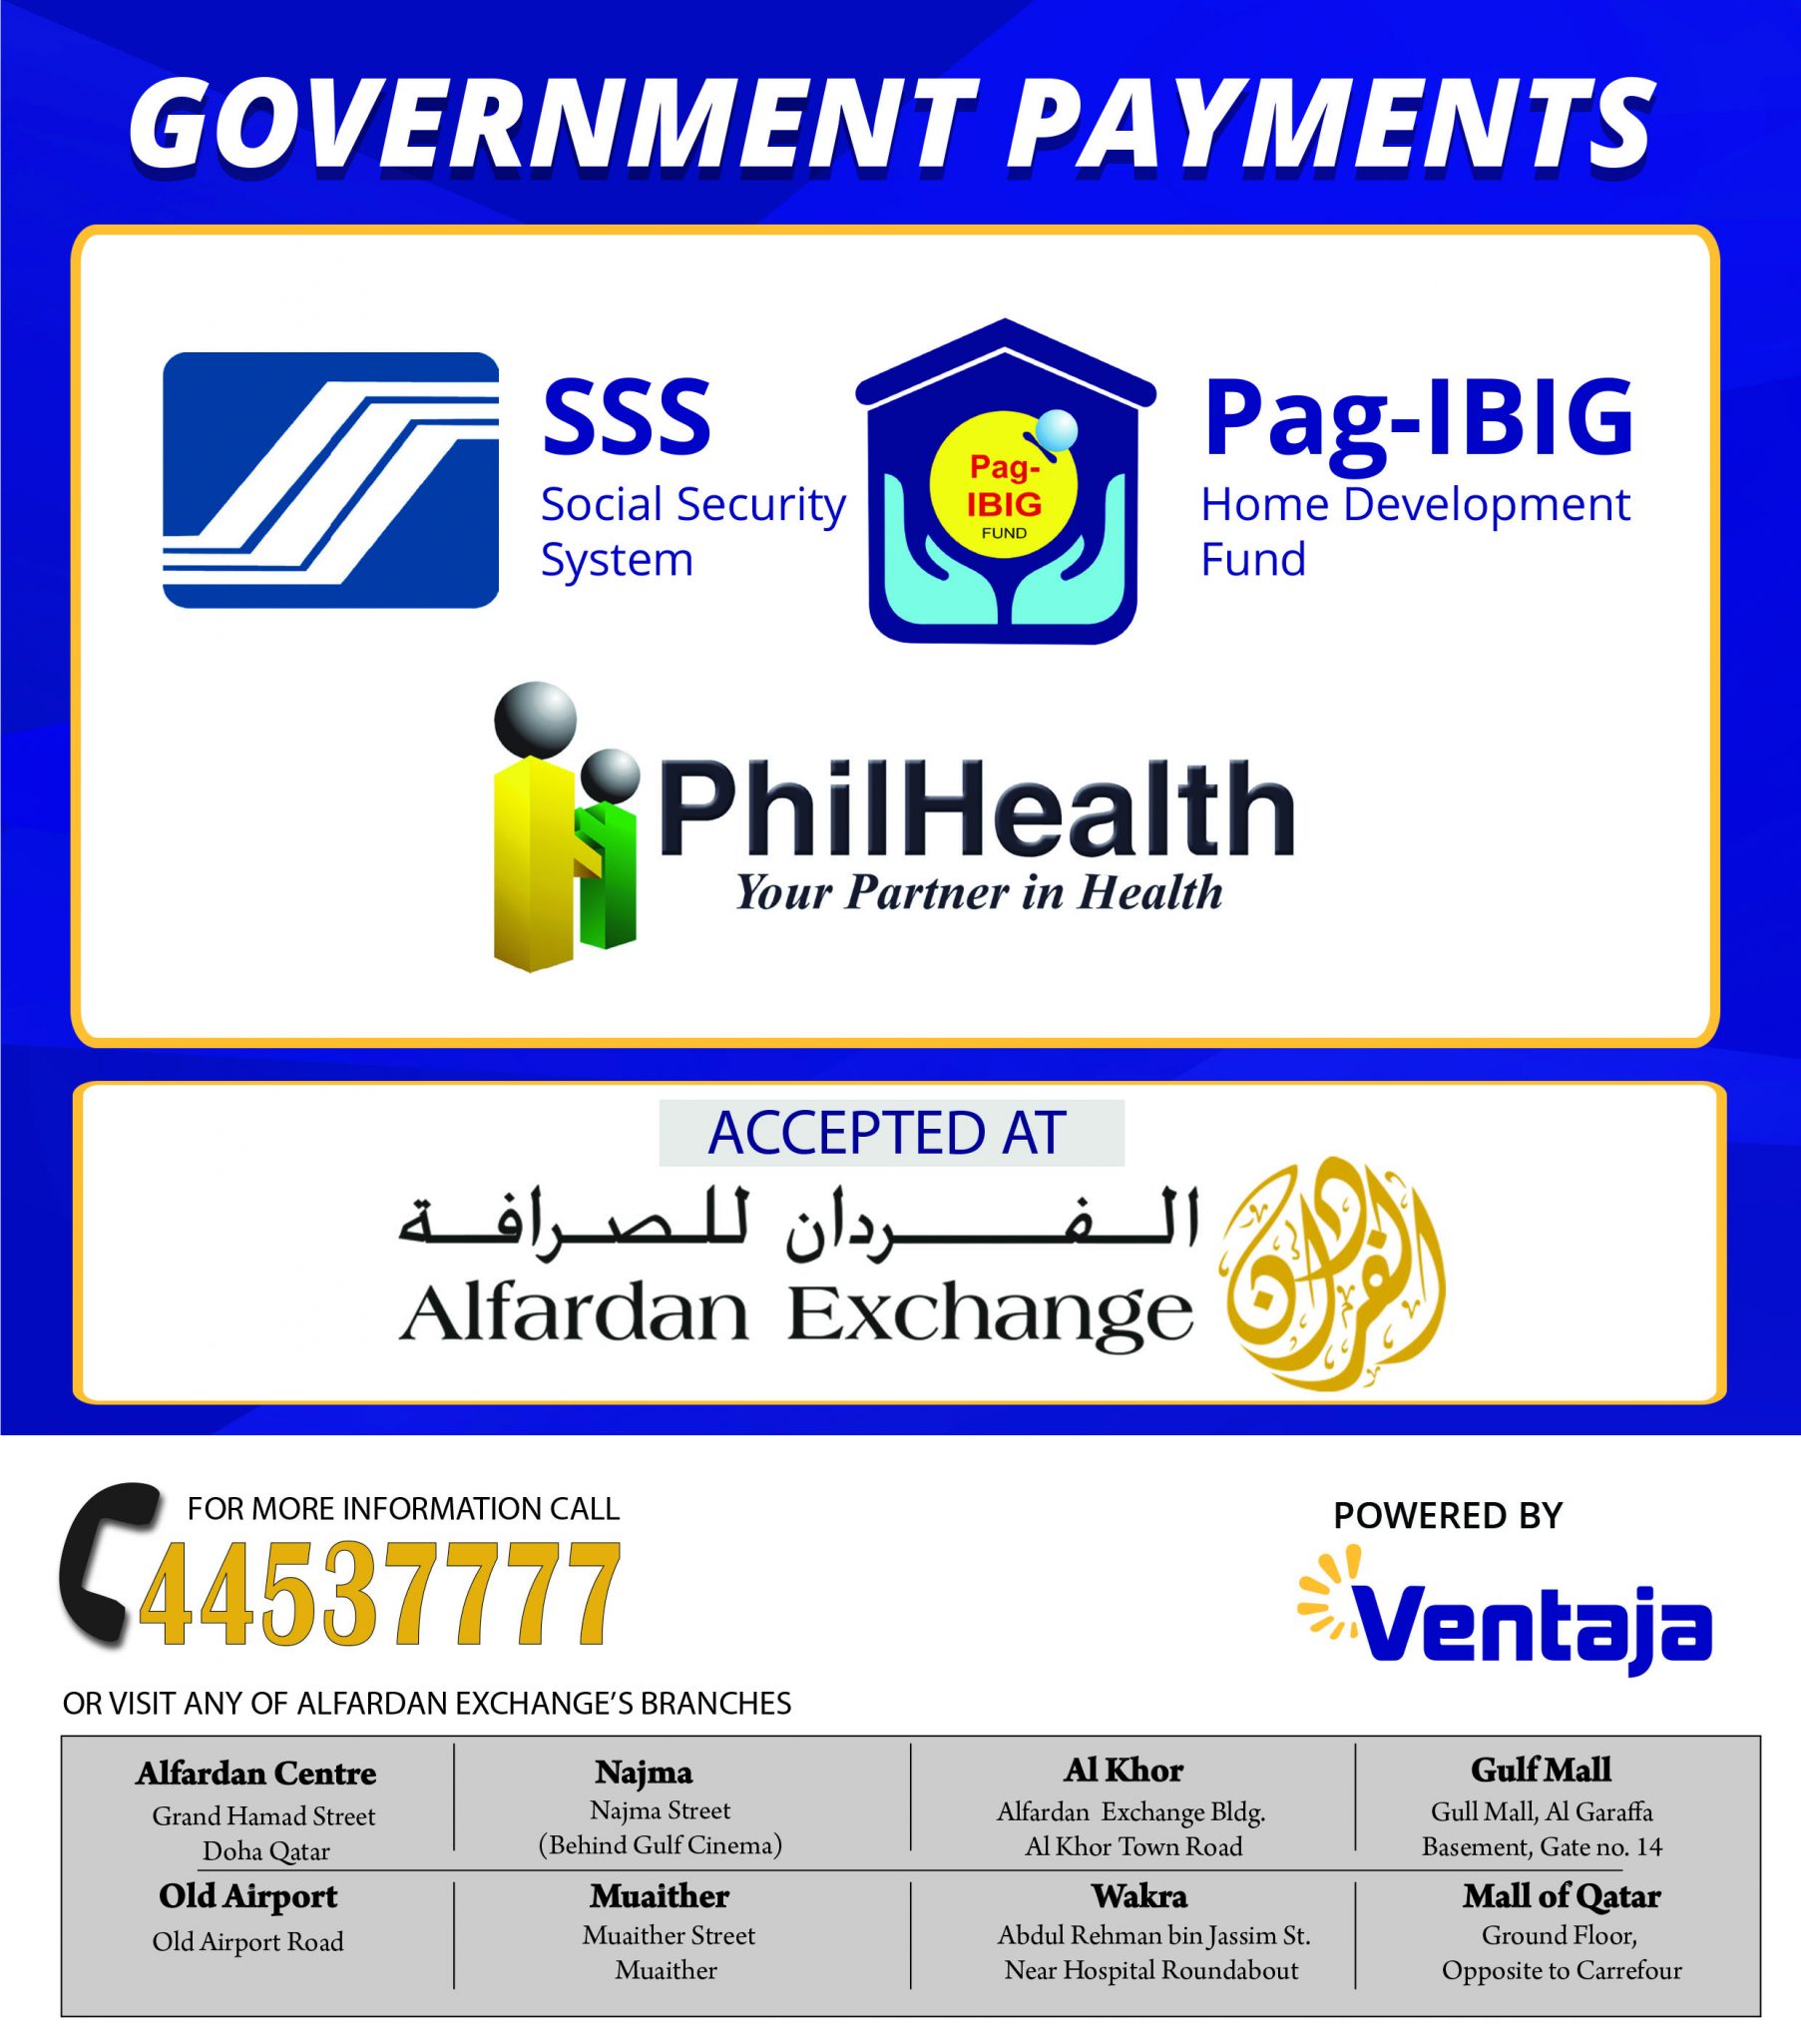 Government payments